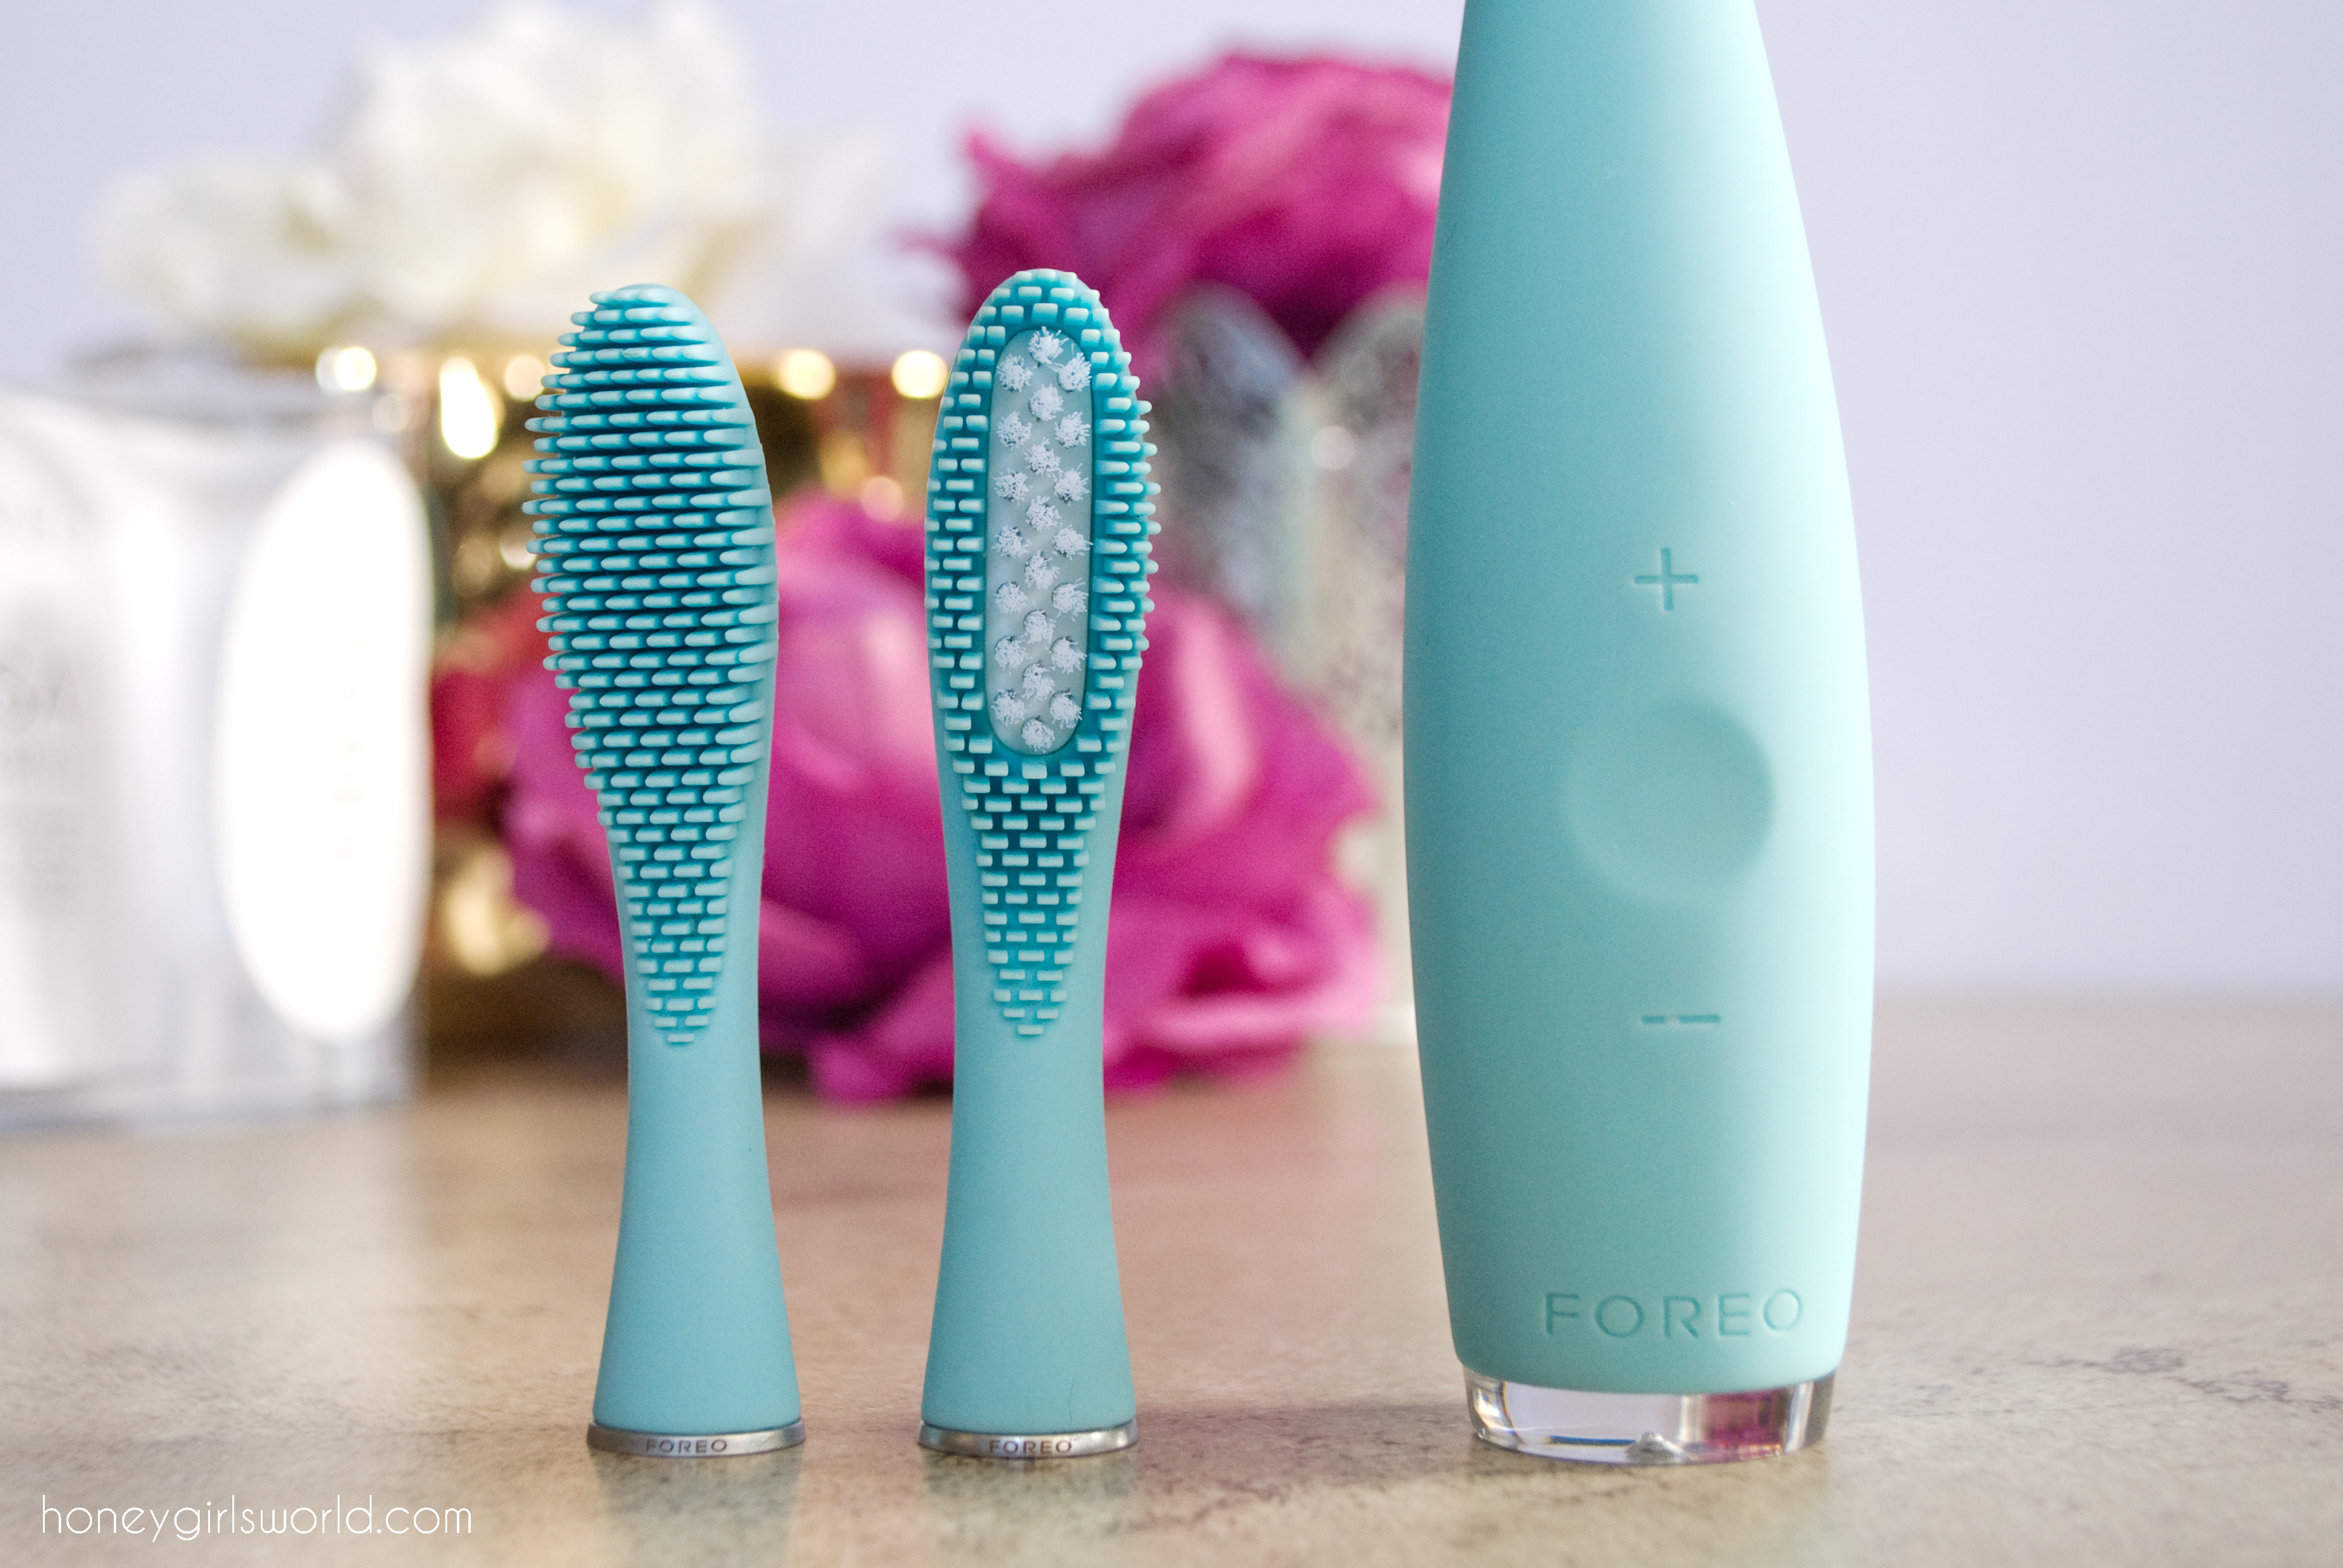 foreo, foreo ISSA, Foreo ISSA Hybrid, toothbrush, dental hygiene, cleansing, tooth cleaning, Foreo ISSA Hybrid brush head, 